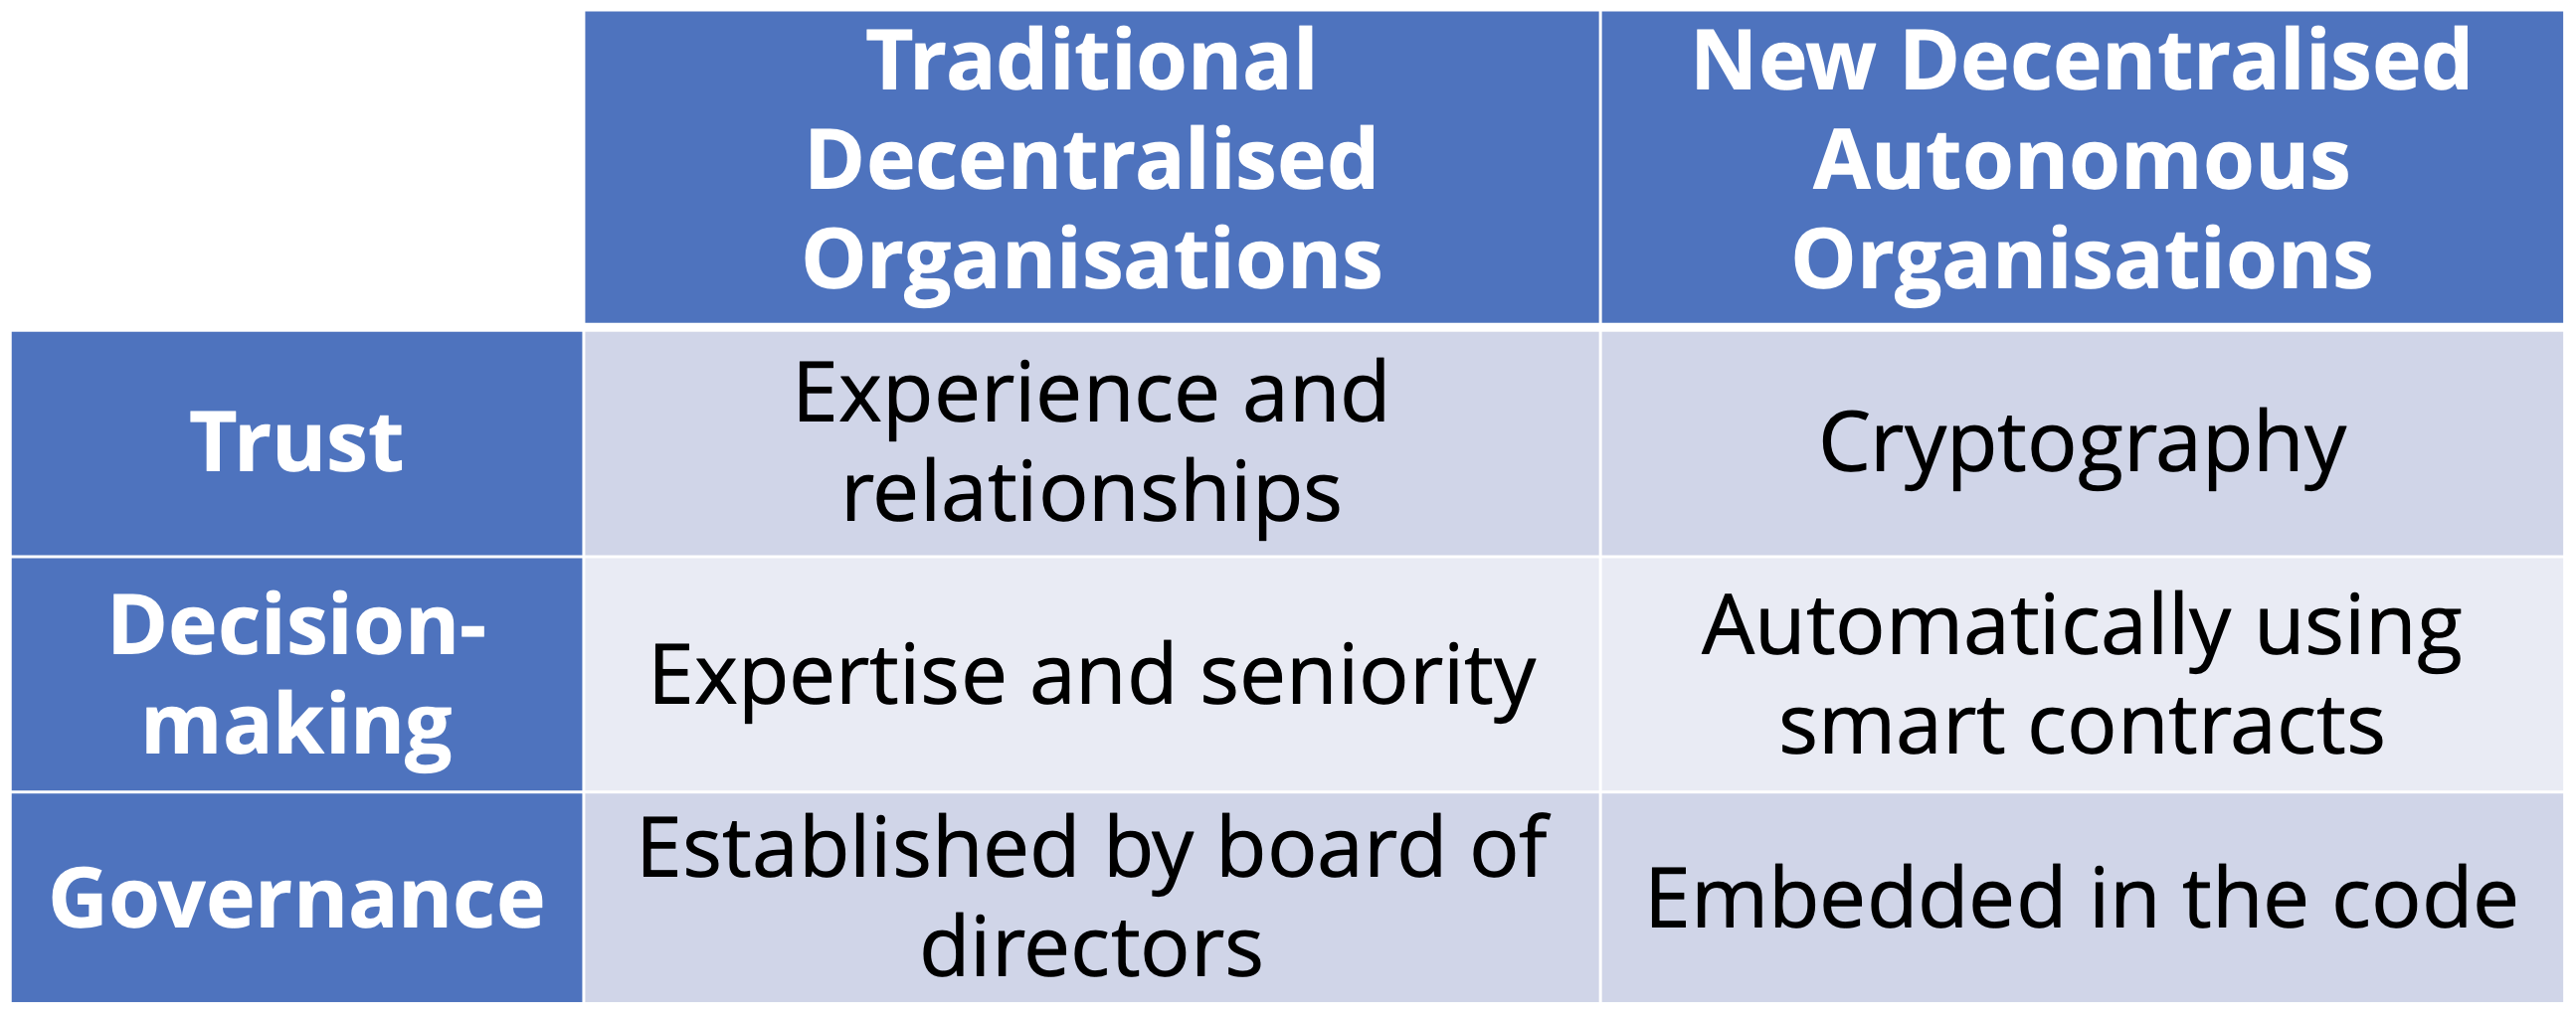 Traditional and new decentralised organisations.png